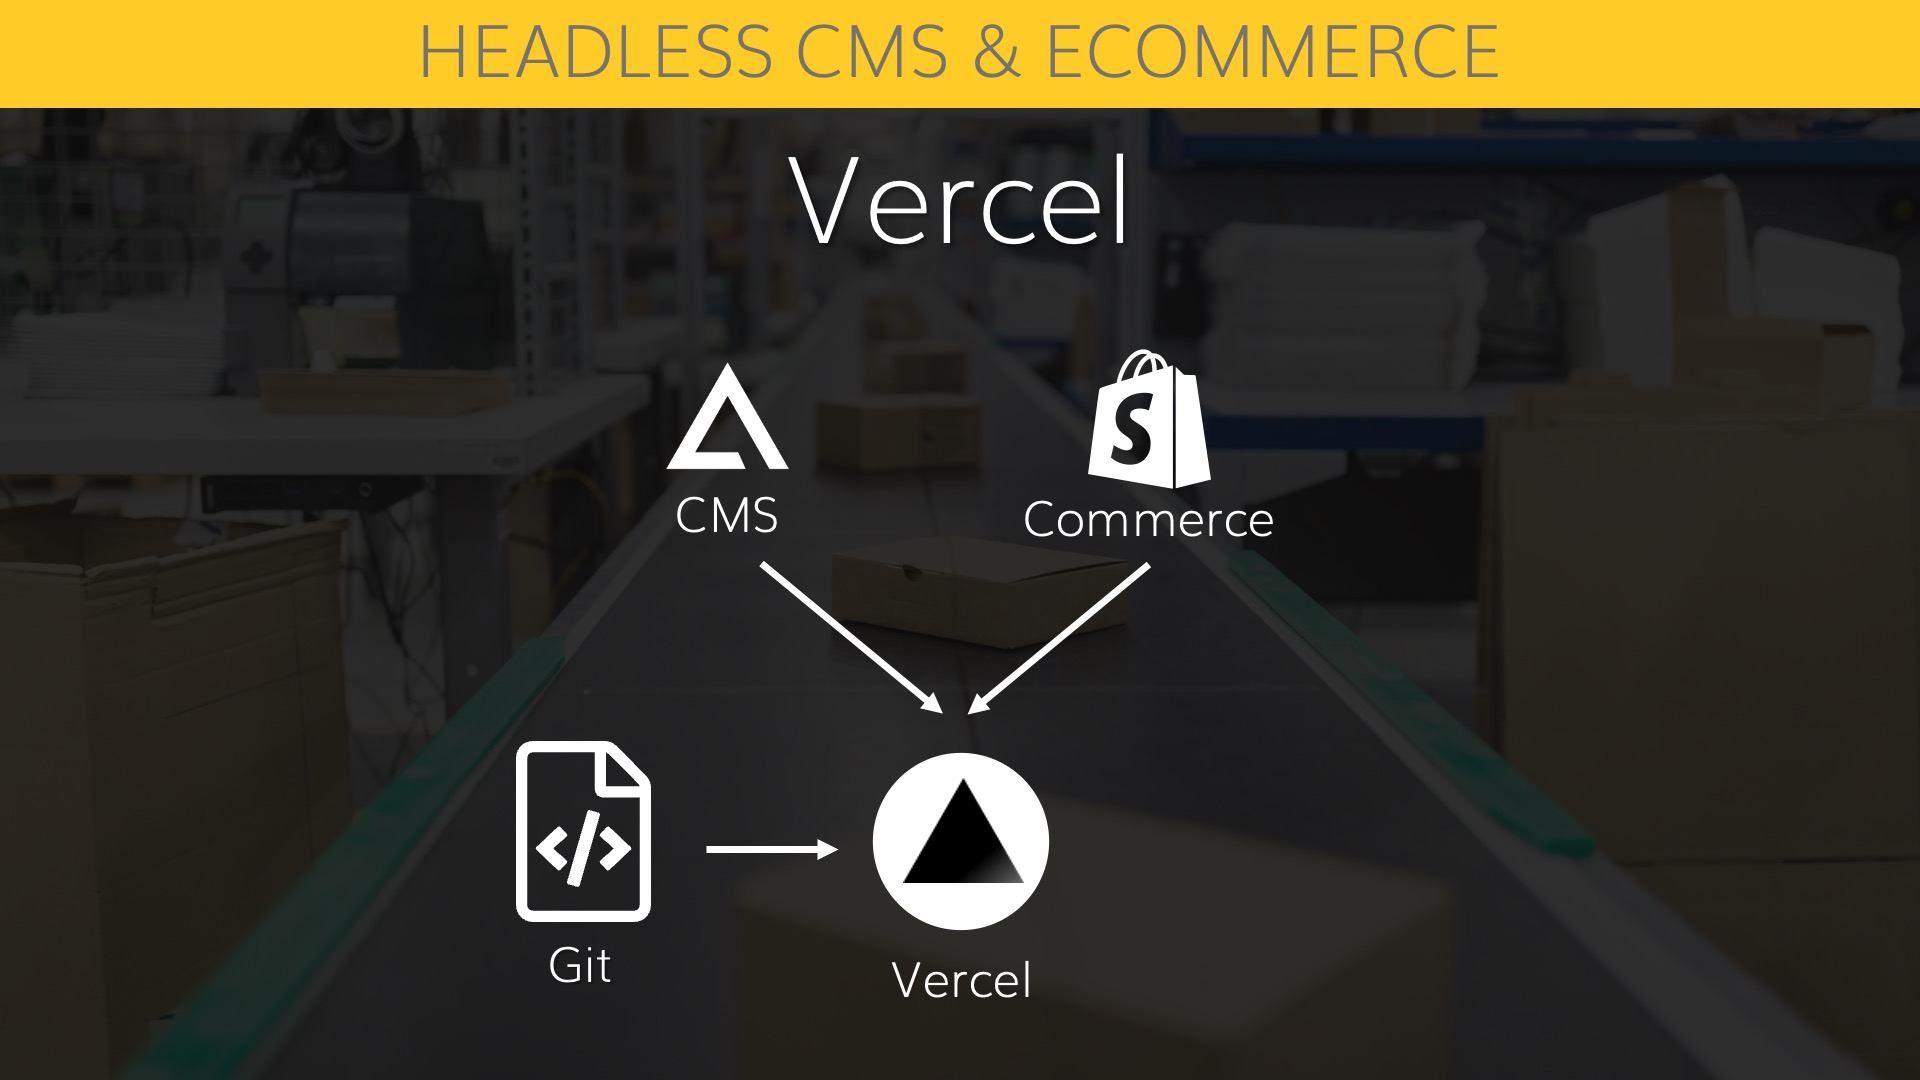 Using Vercel for faster and easier options with Agility CMS